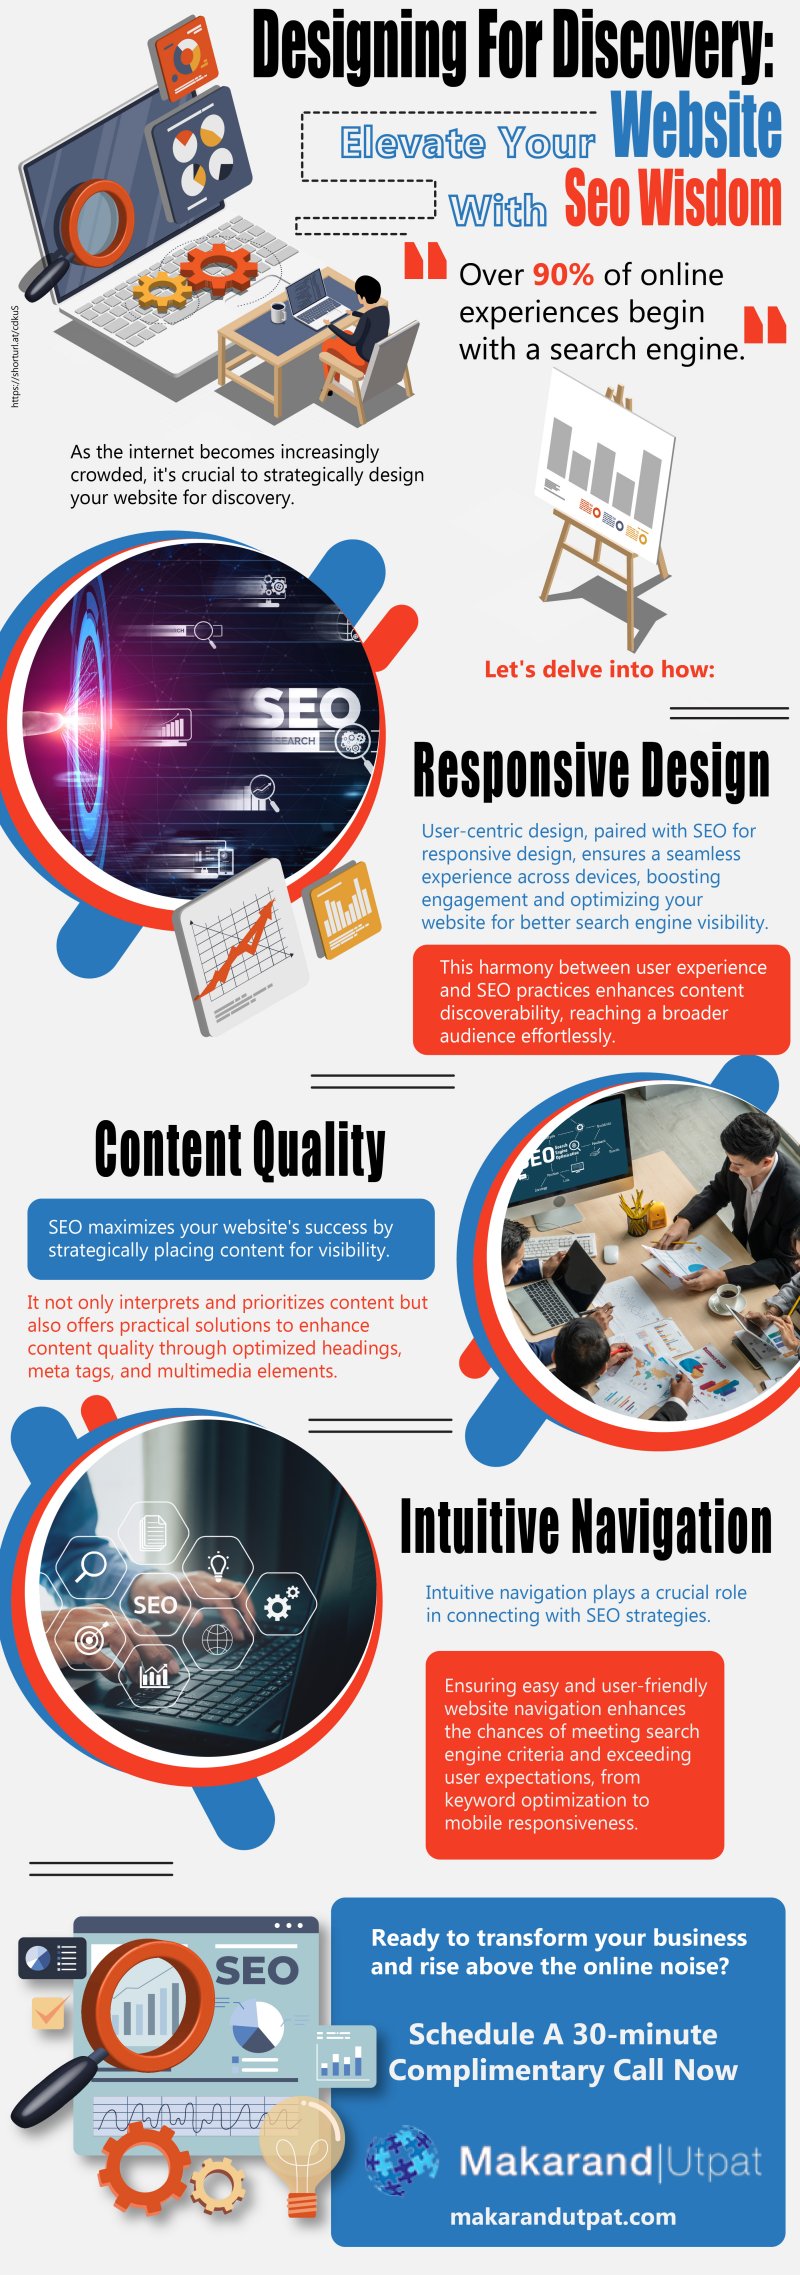 Design for Discovery - An Infographic